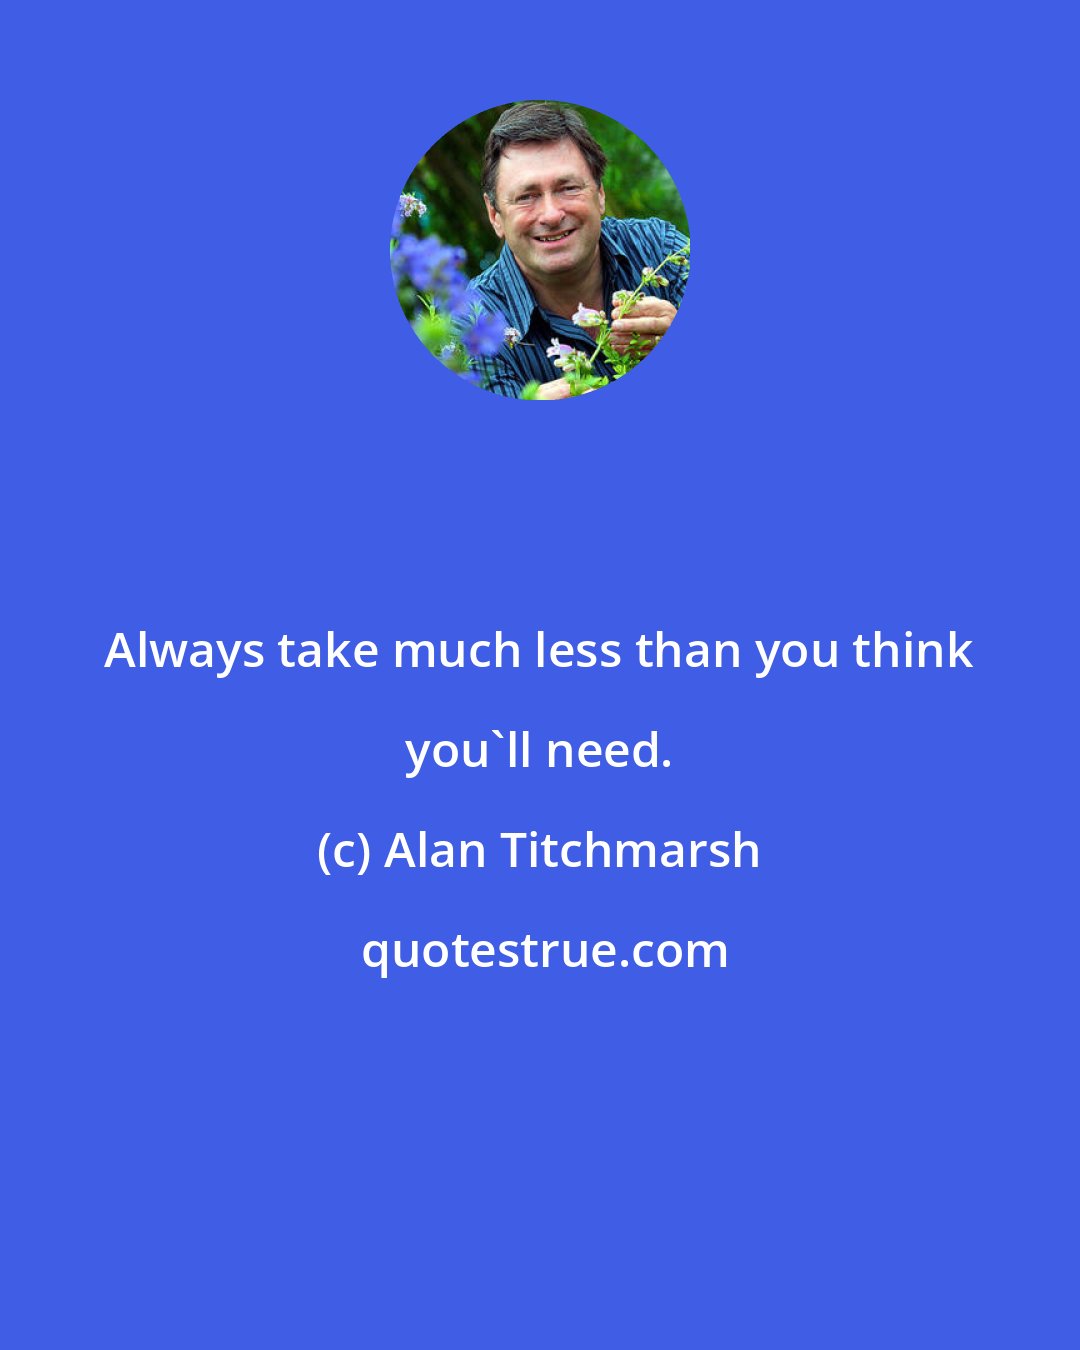 Alan Titchmarsh: Always take much less than you think you'll need.